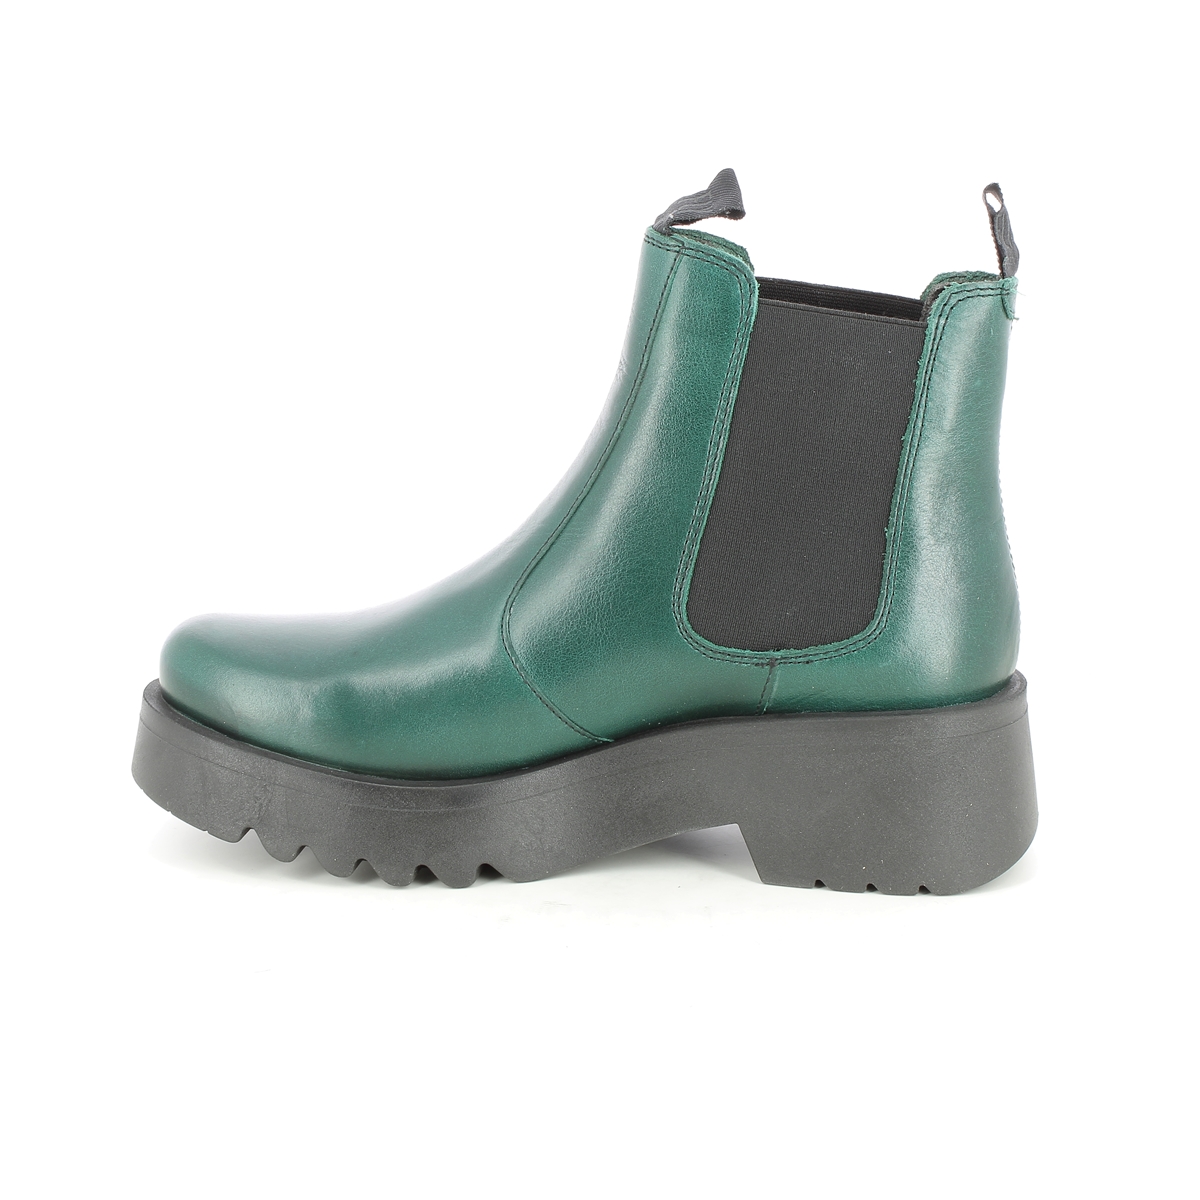 Fly London Medi Midland Green Womens Chelsea Boots P144789-003